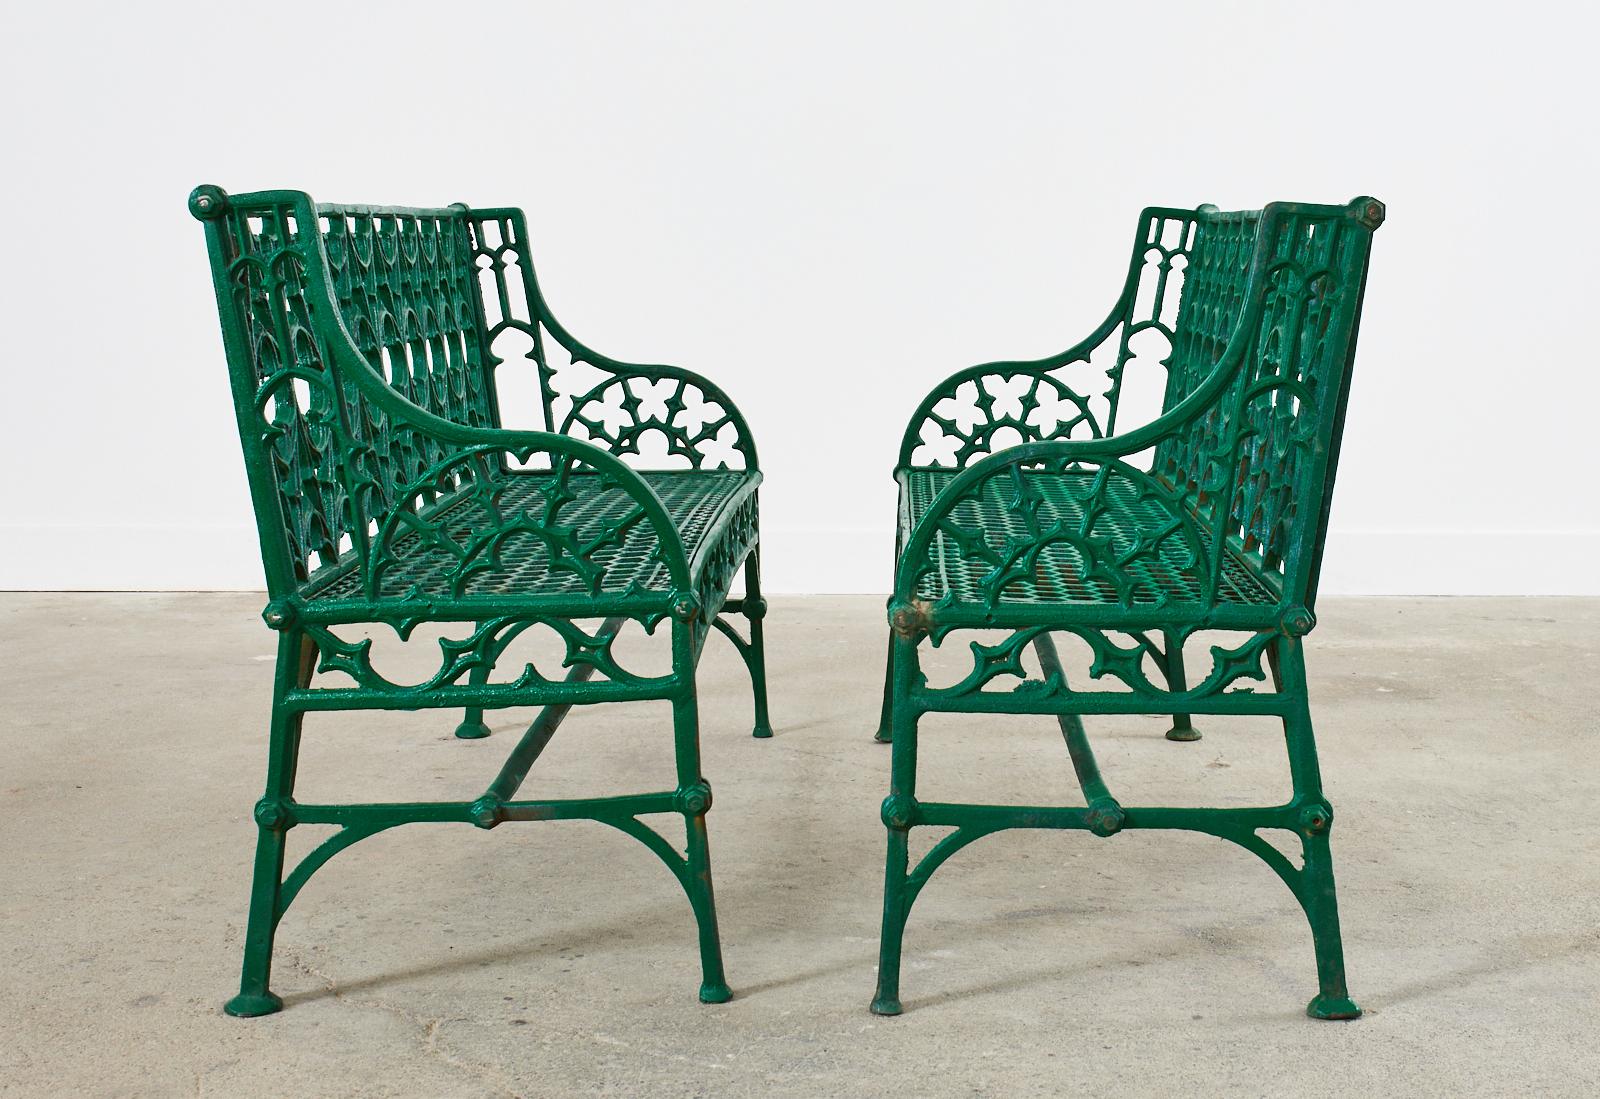 20th Century Pair of English Coalbrookdale Attributed Iron Gothic Garden Benches